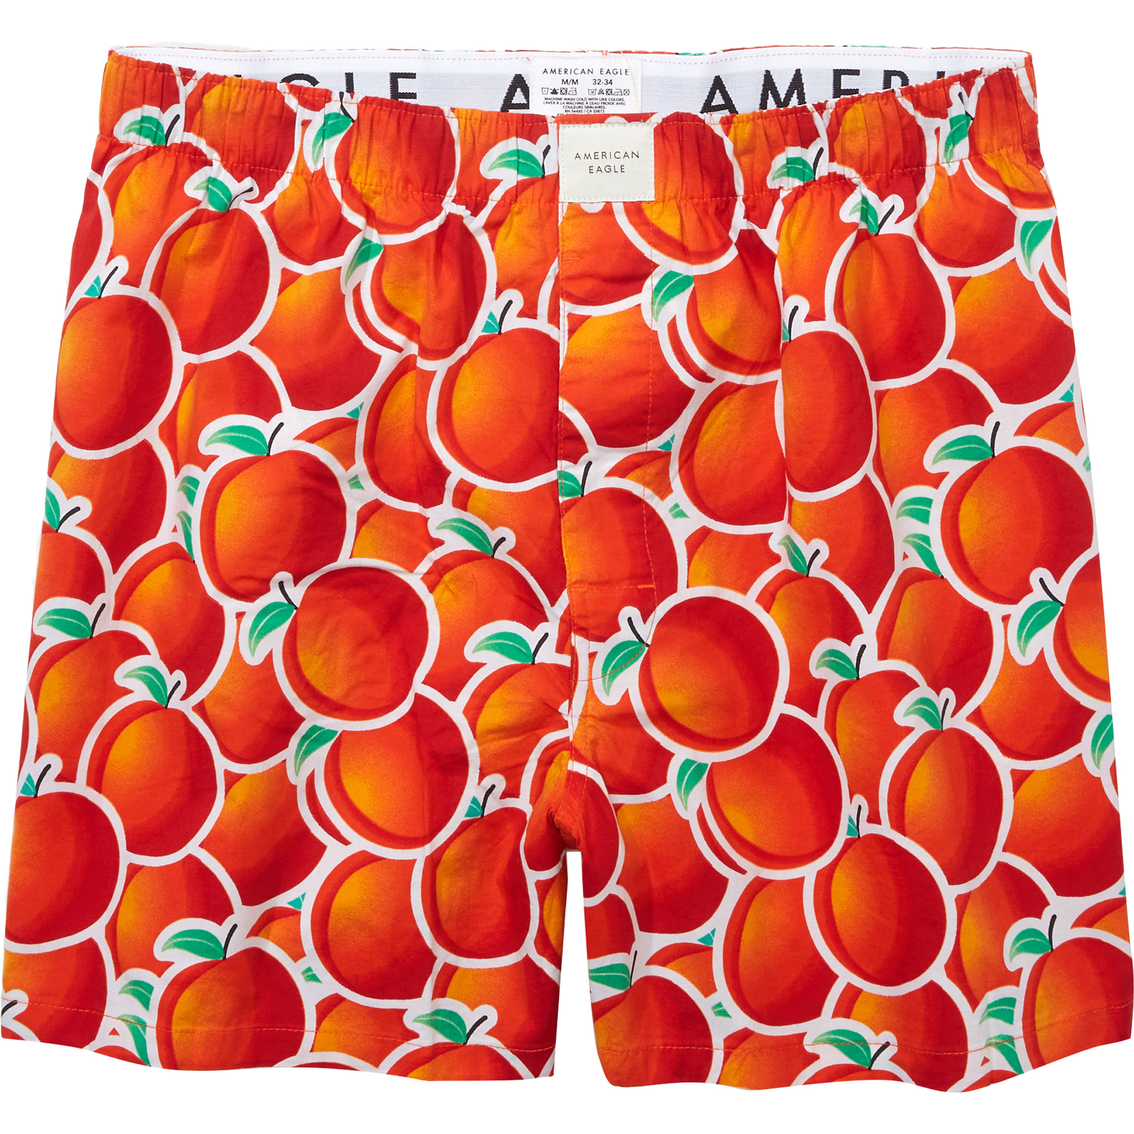 American Eagle AEO Peaches Stretch Boxer Shorts - Image 3 of 4